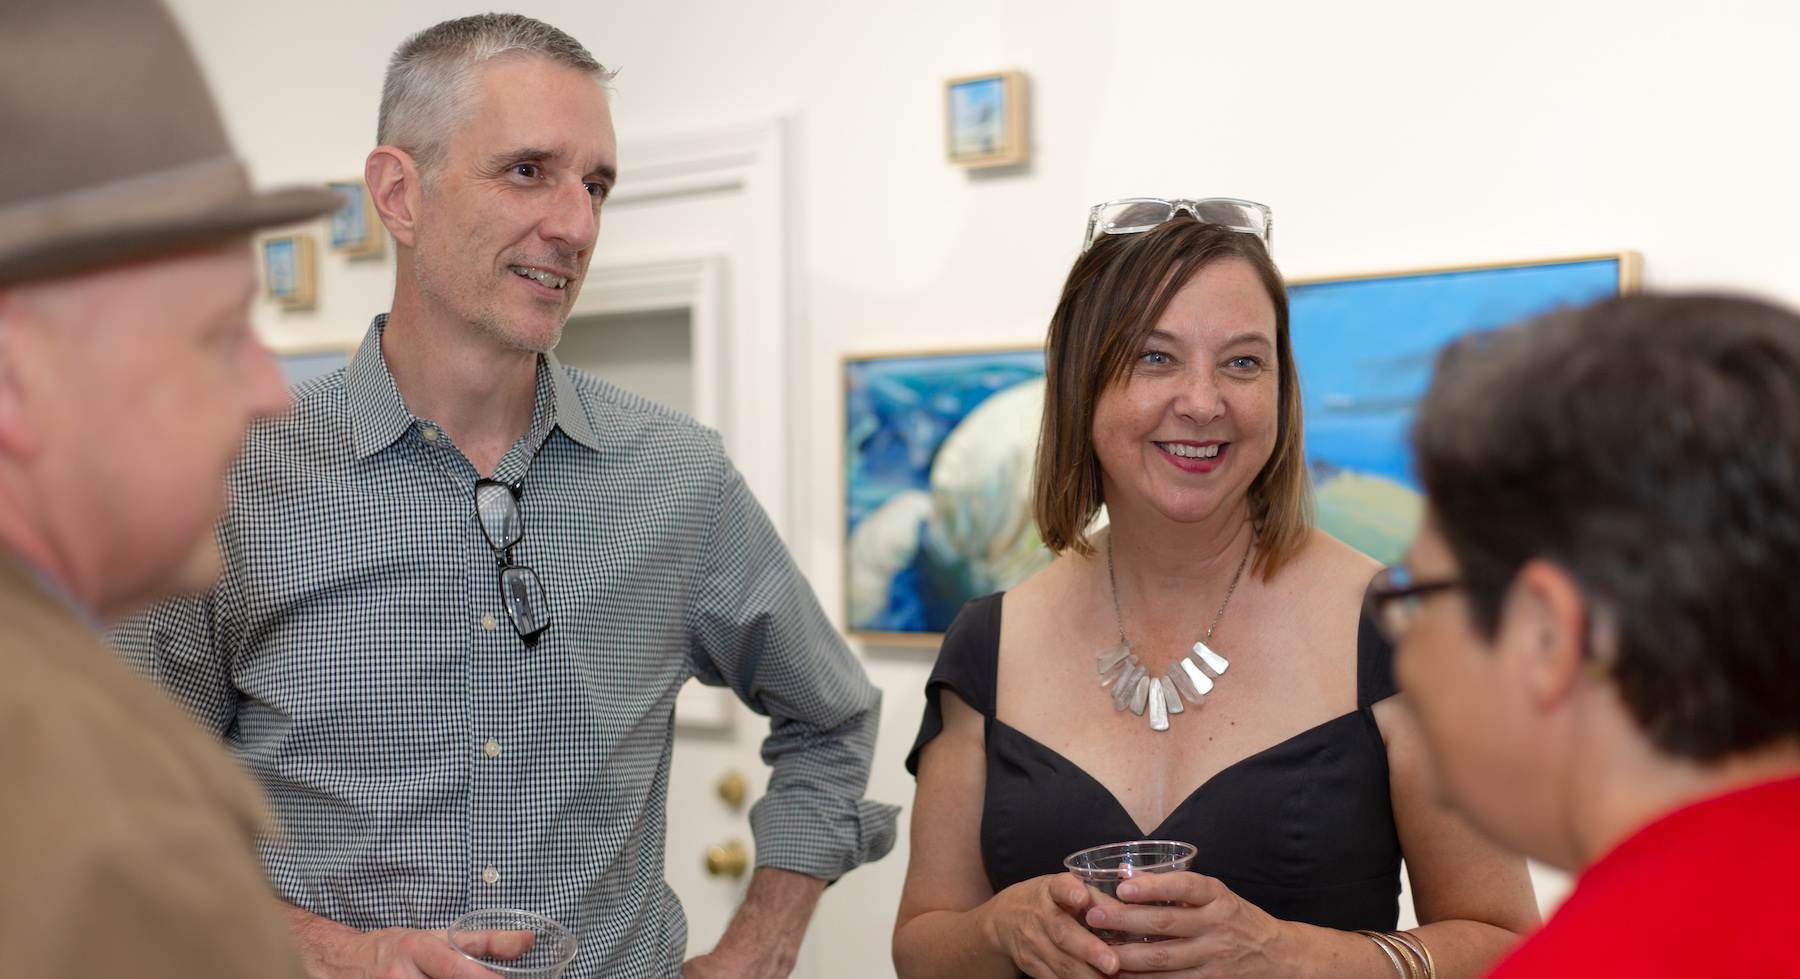 Artists John and Caroline Rufo at an exhibition opening in front of their art - talking with guests | on Alyson Stanfield